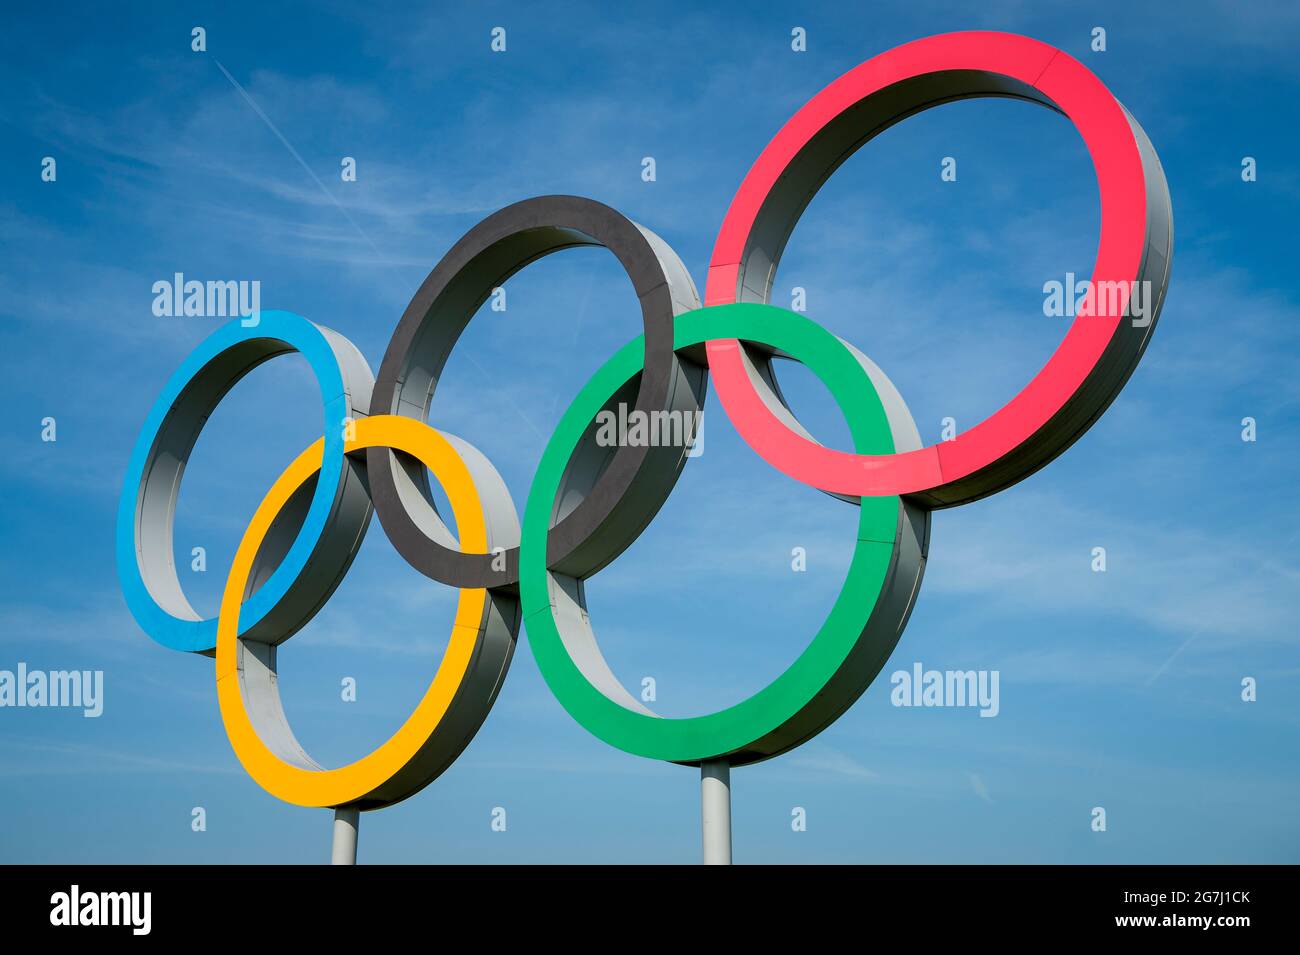 RIO DE JANEIRO - OCTOBER, 2015: A large set of Olympic Rings stand under bright blue sky. Stock Photo